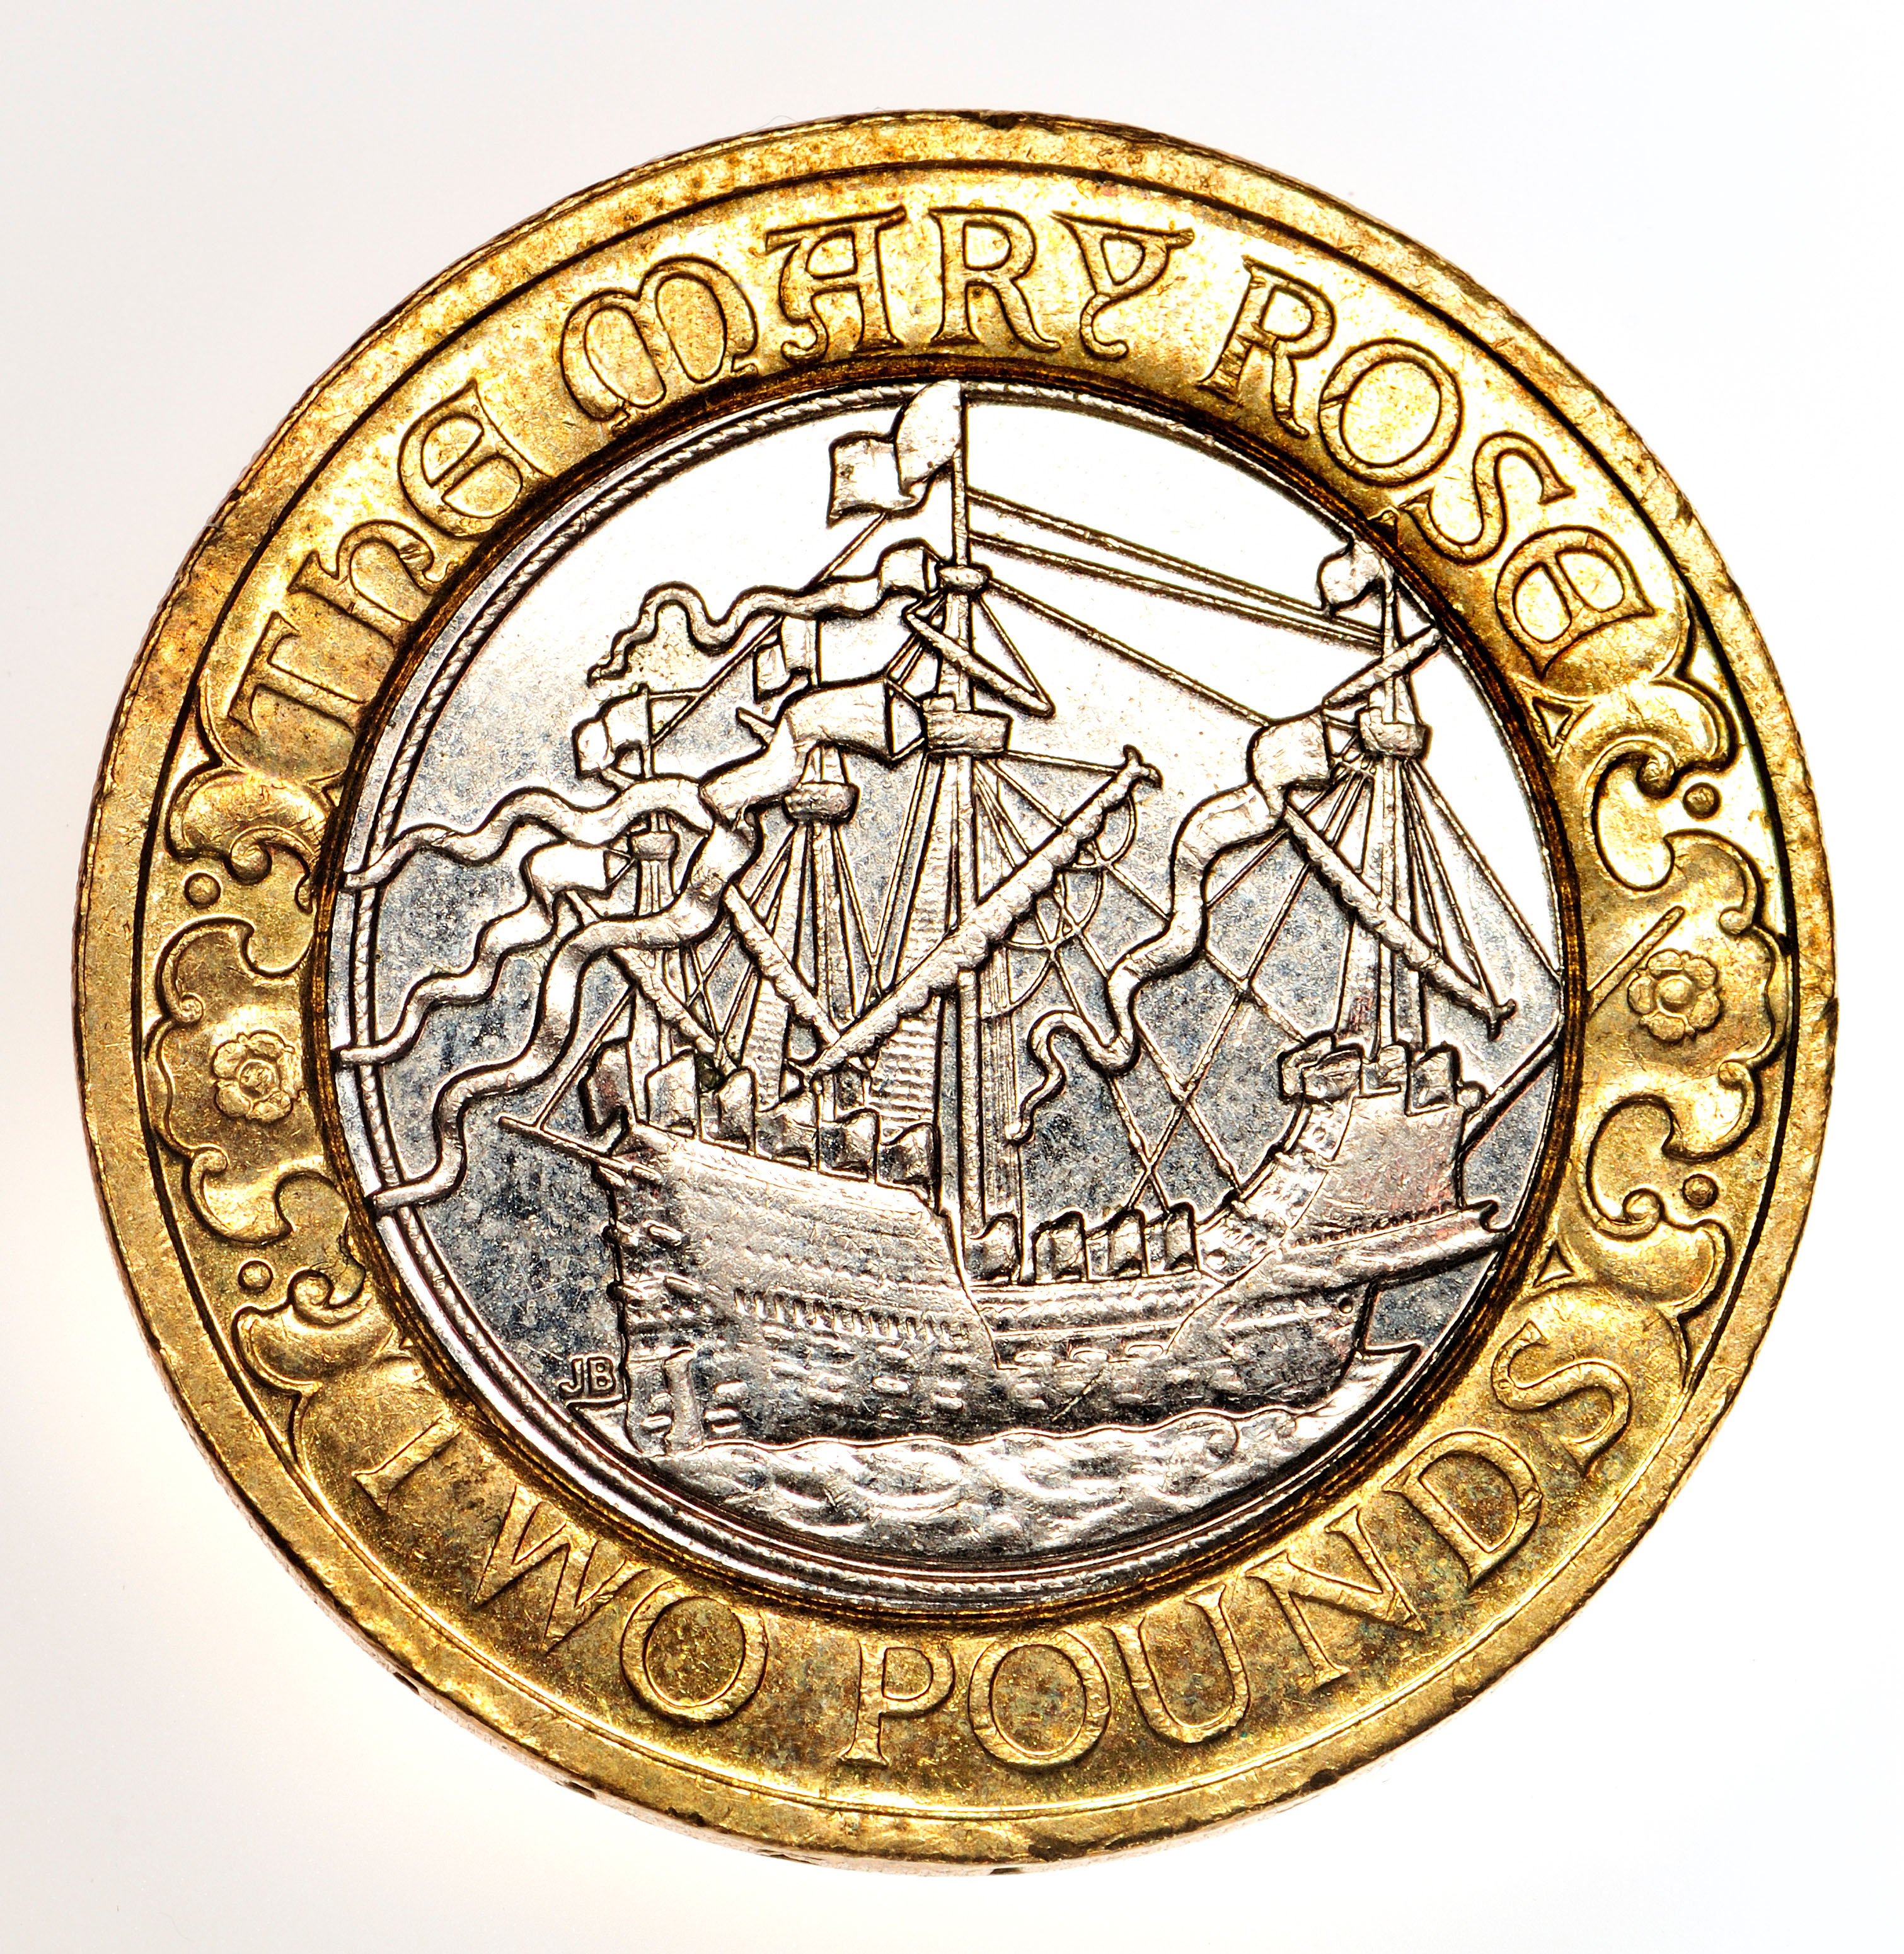 The 2011 Mary Rose coin can fetch around £5 on eBay